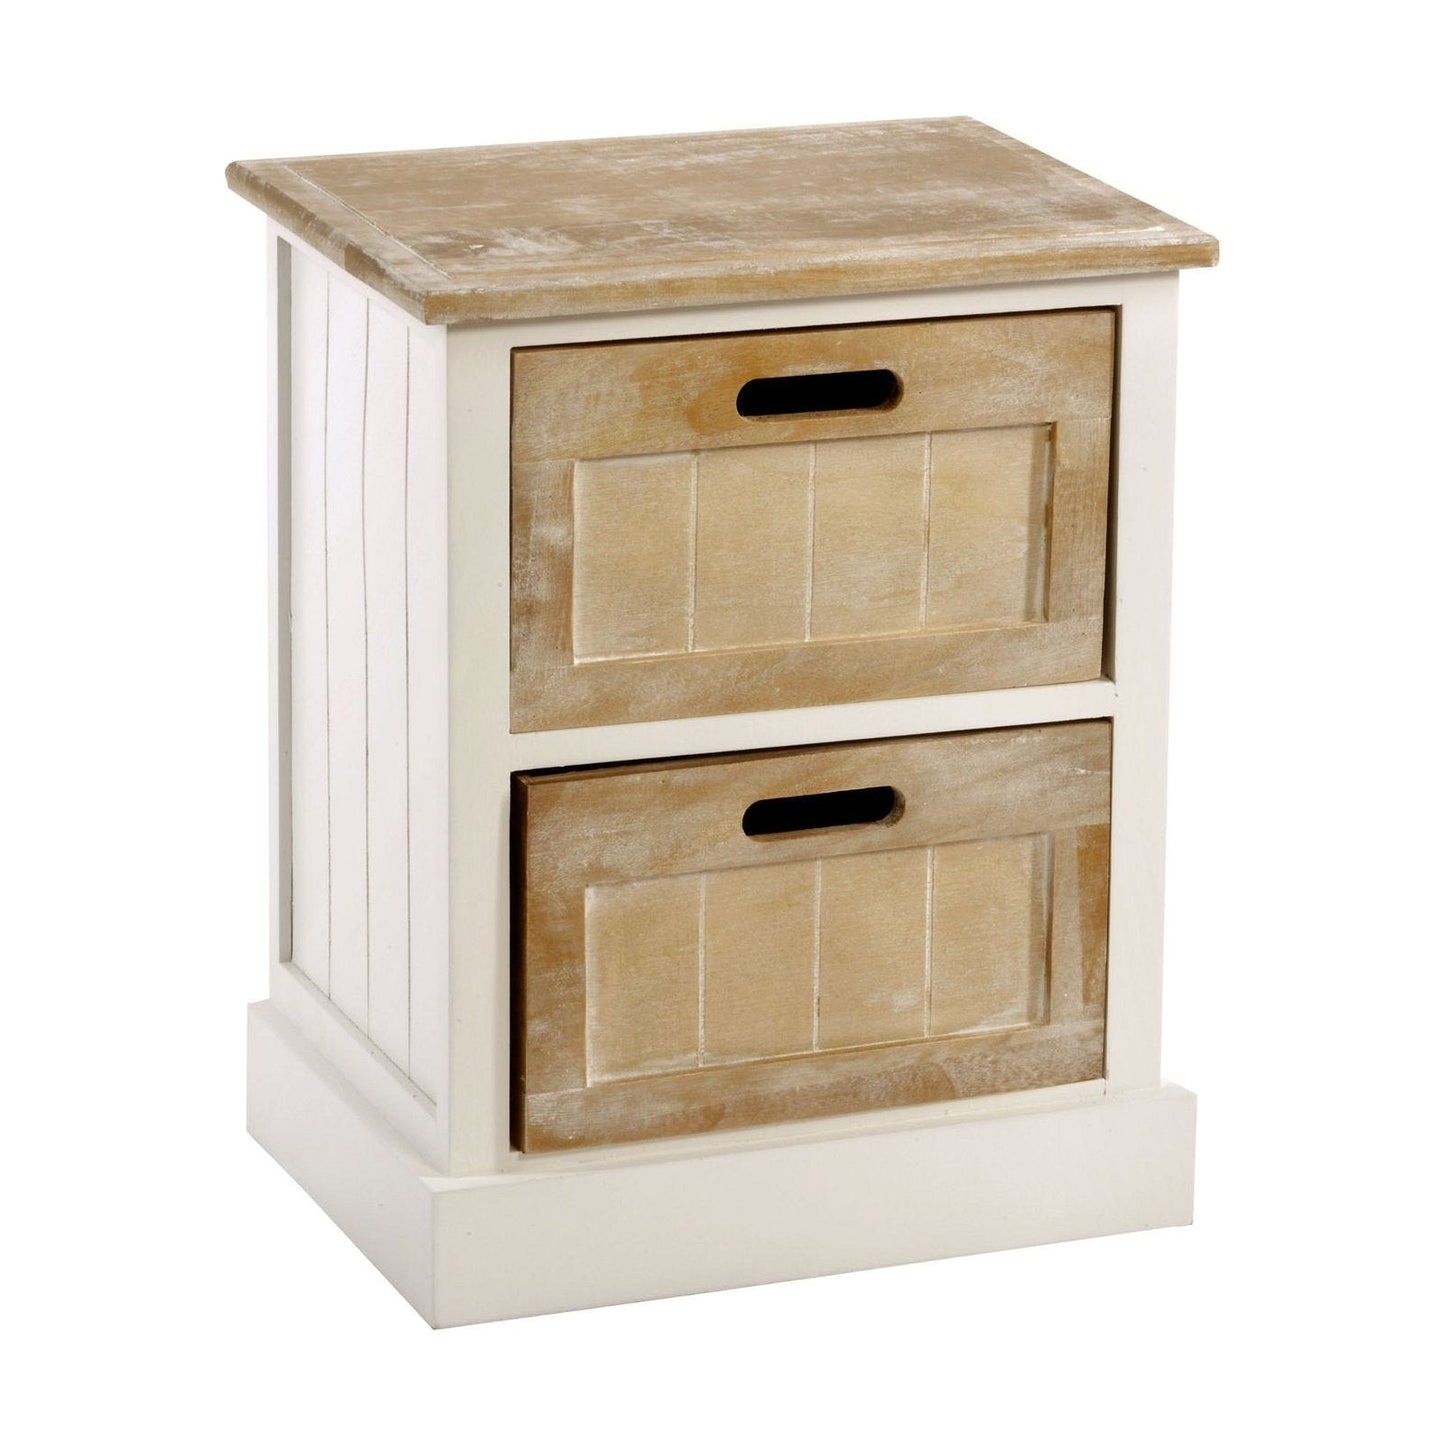 White Wooden Cabinet 2 Drawer 38 x 28 x 48cm - Ashton and Finch